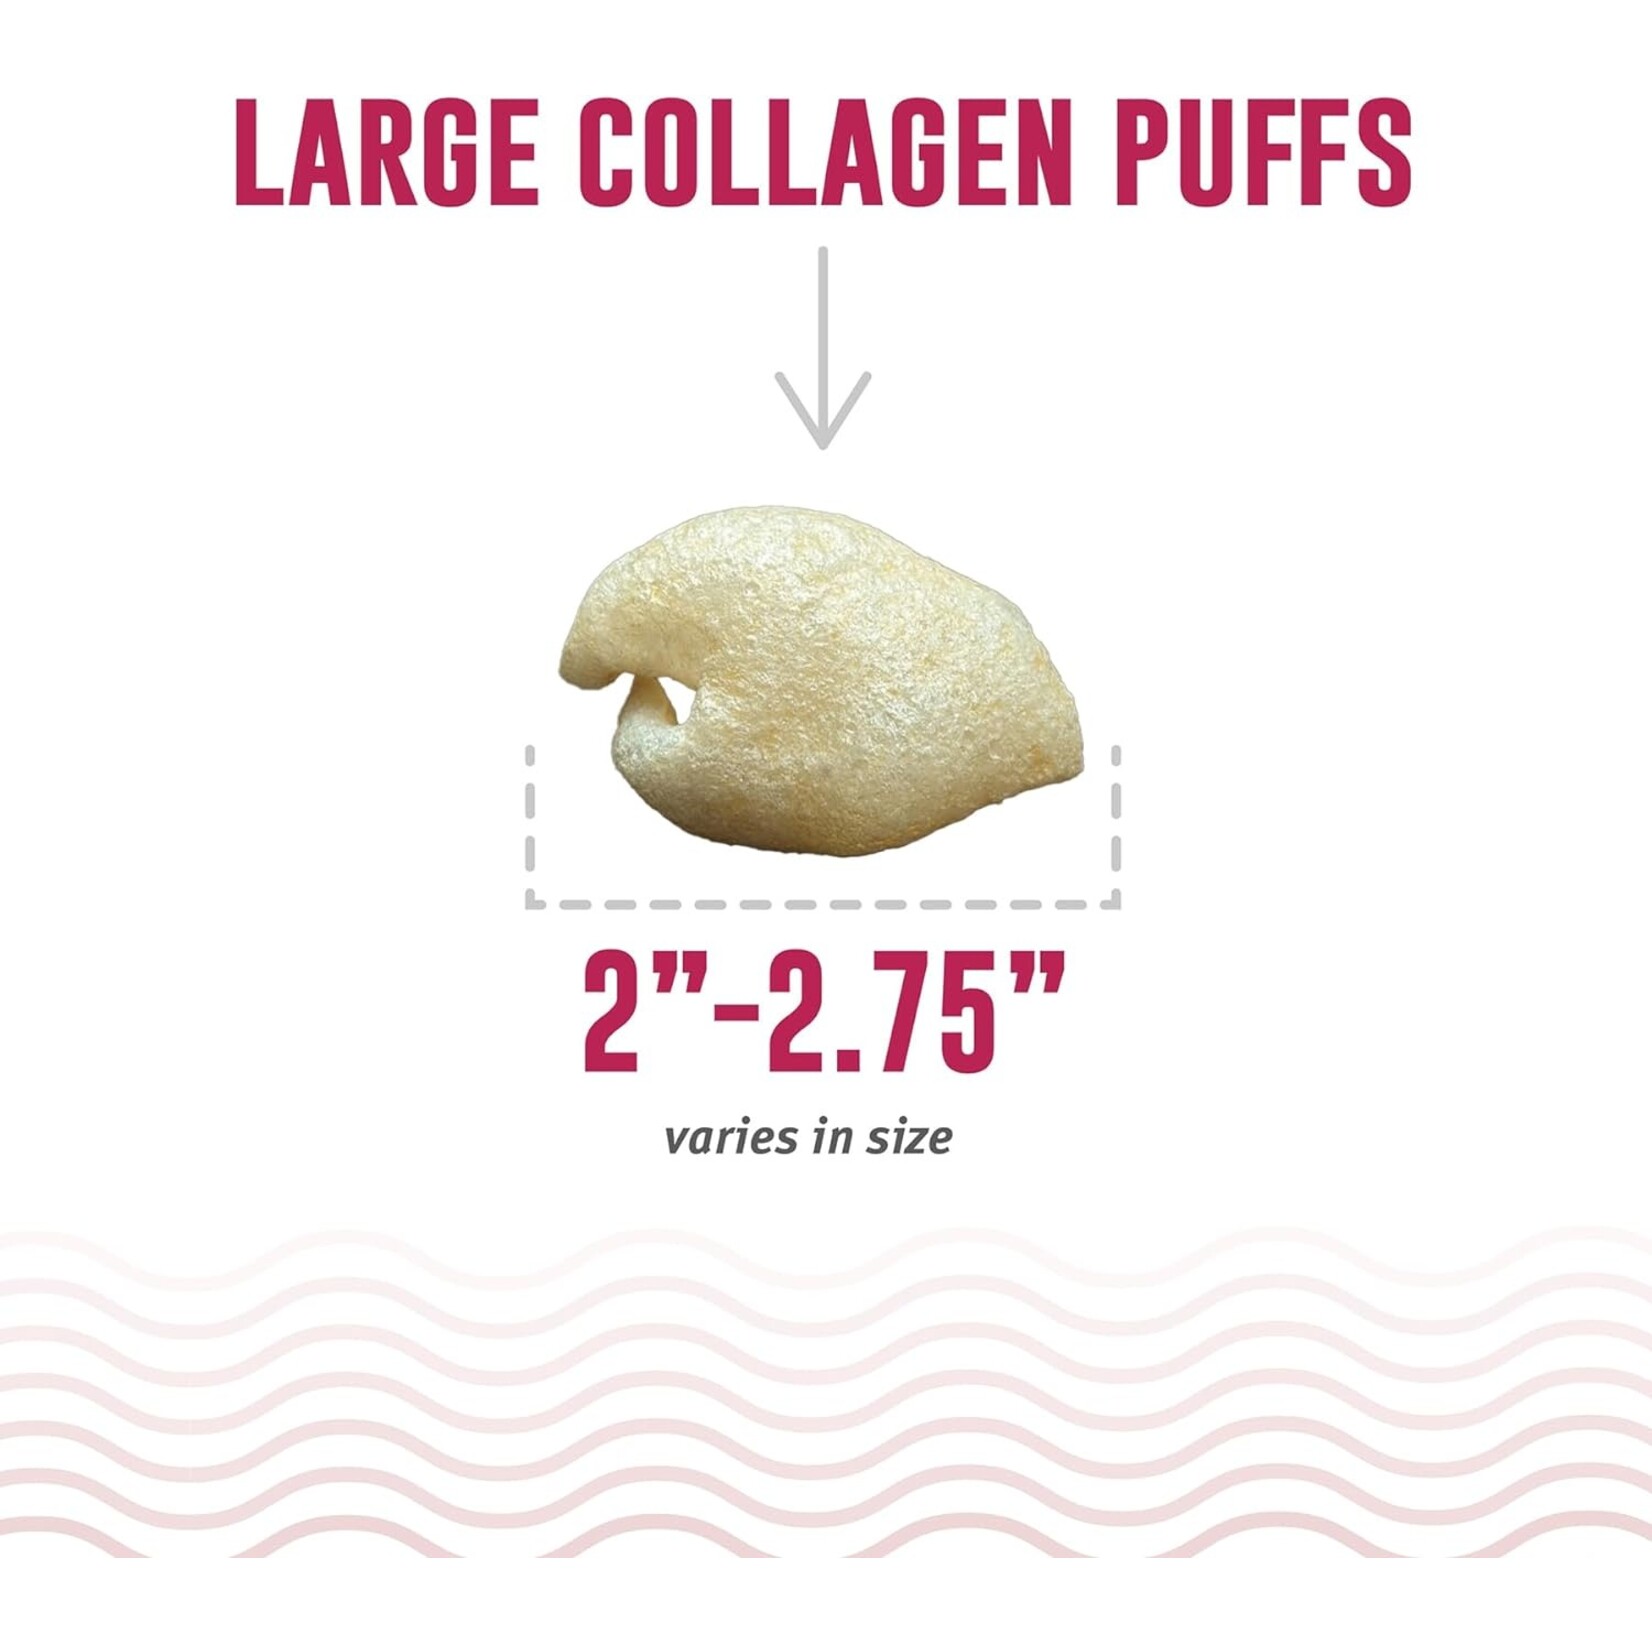 Icelandic+ Icelandic+ Beef Collagen Puffs with Kelp Treats for Dogs 2.5oz